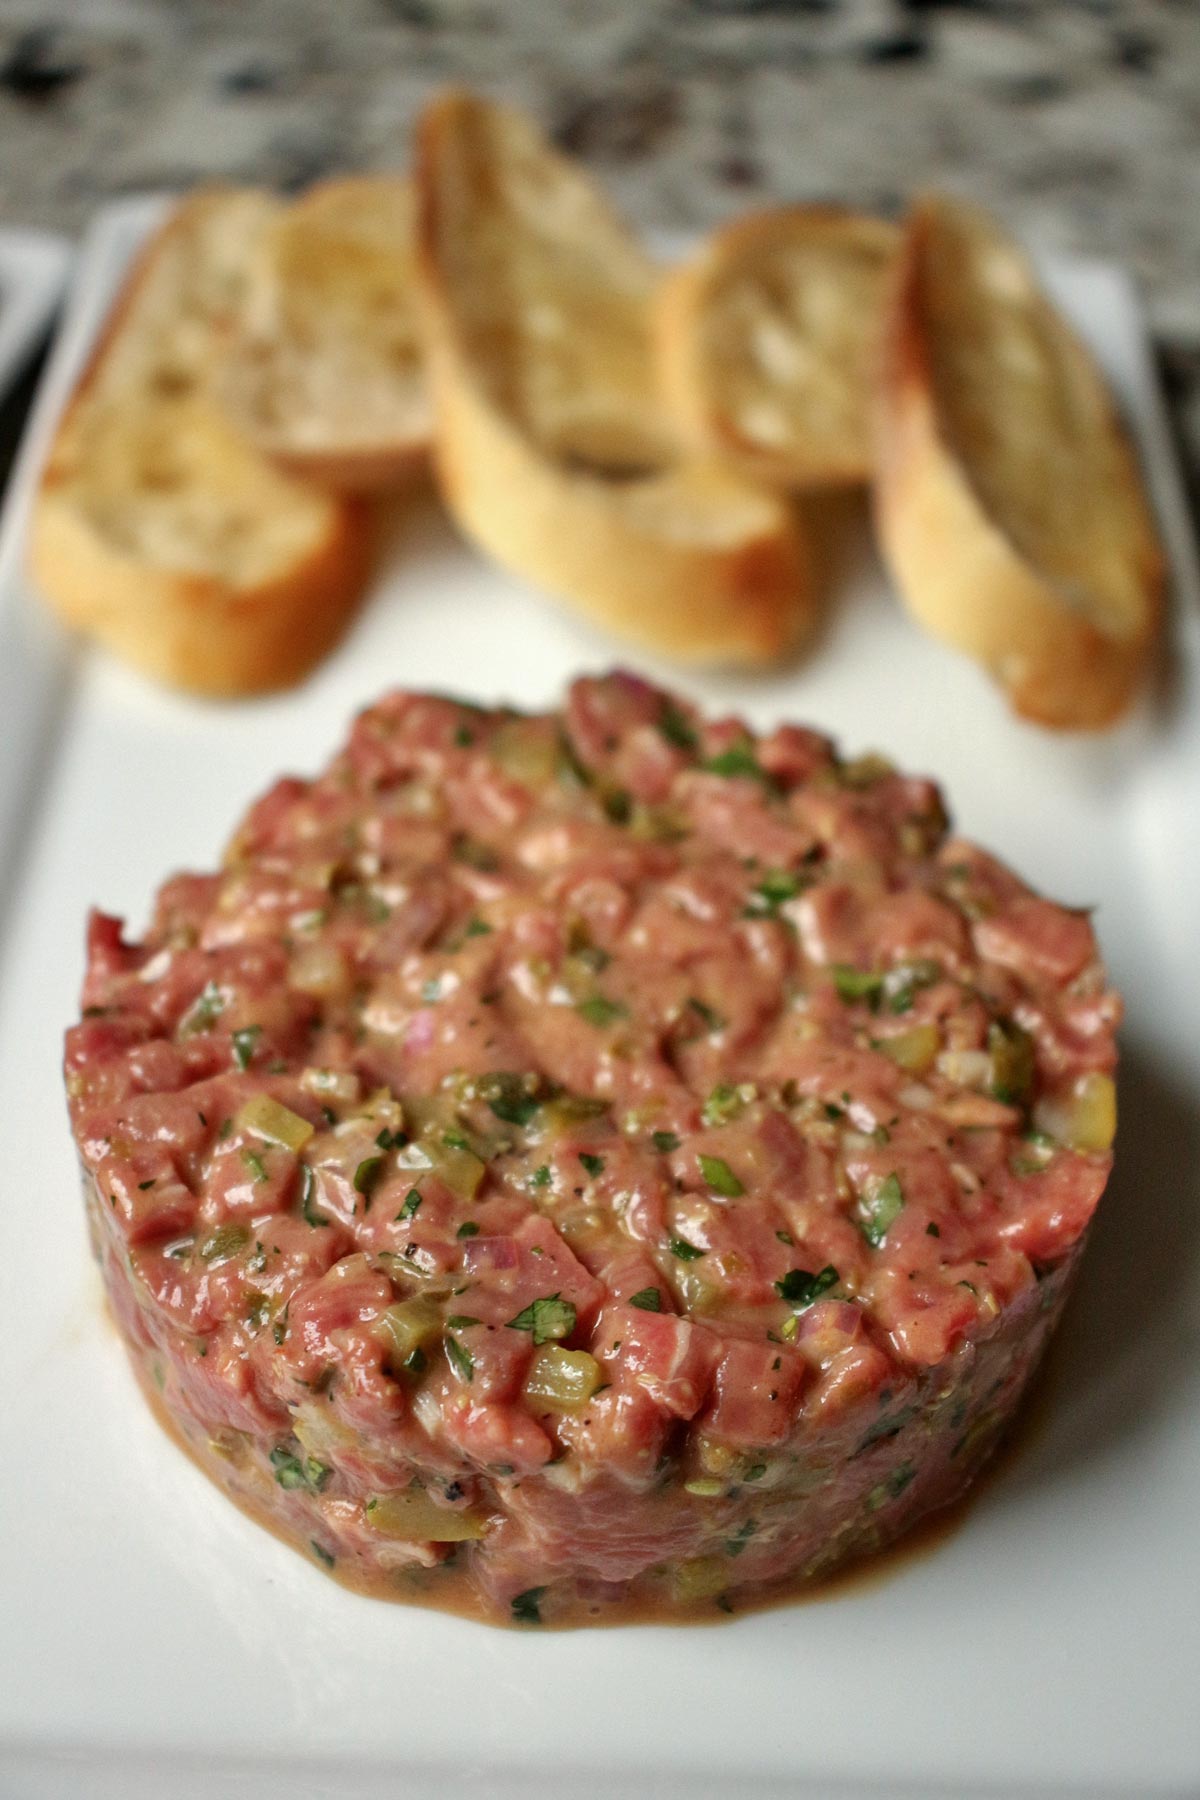 Closeup of steak tartare in round, flat patty, served on a while rectangular plate.